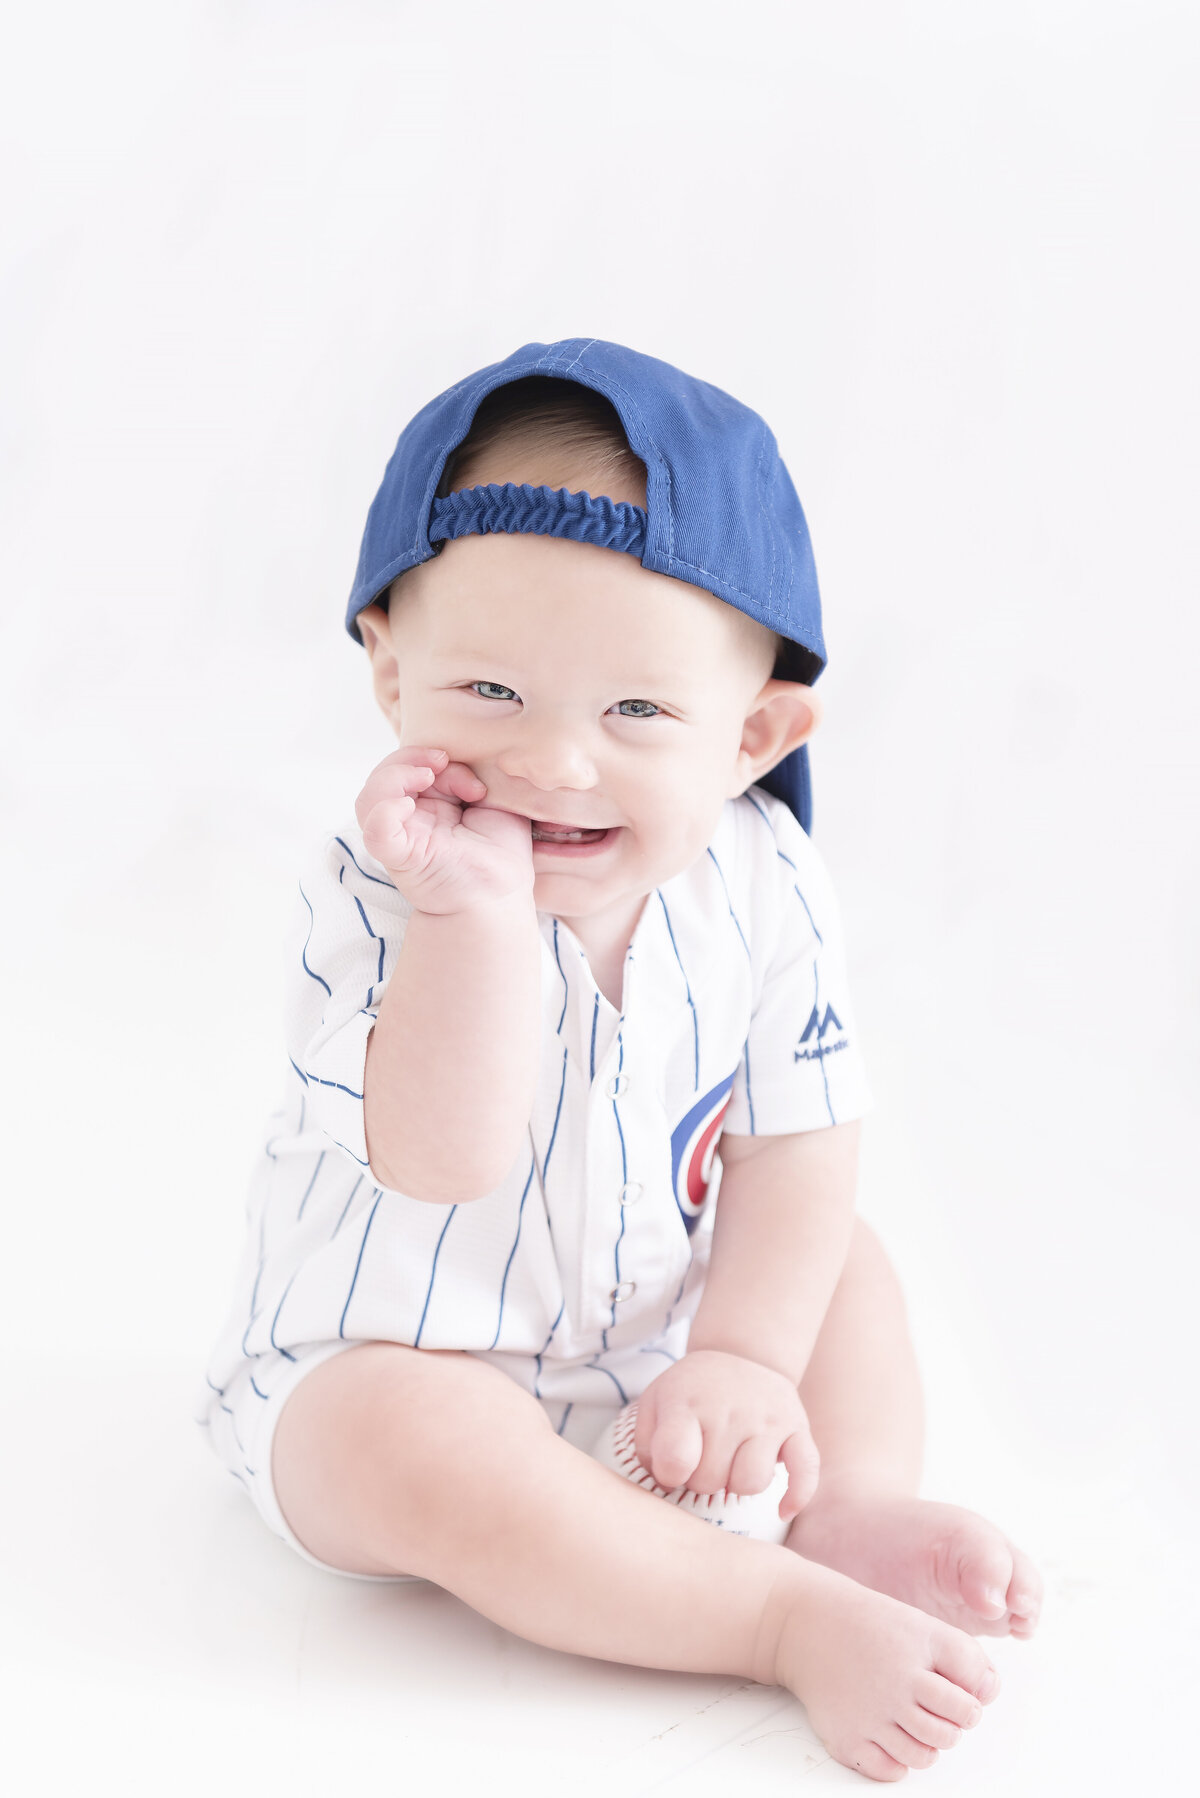 A toddler baby boy sitting in a baseball uniform and hat in a studio